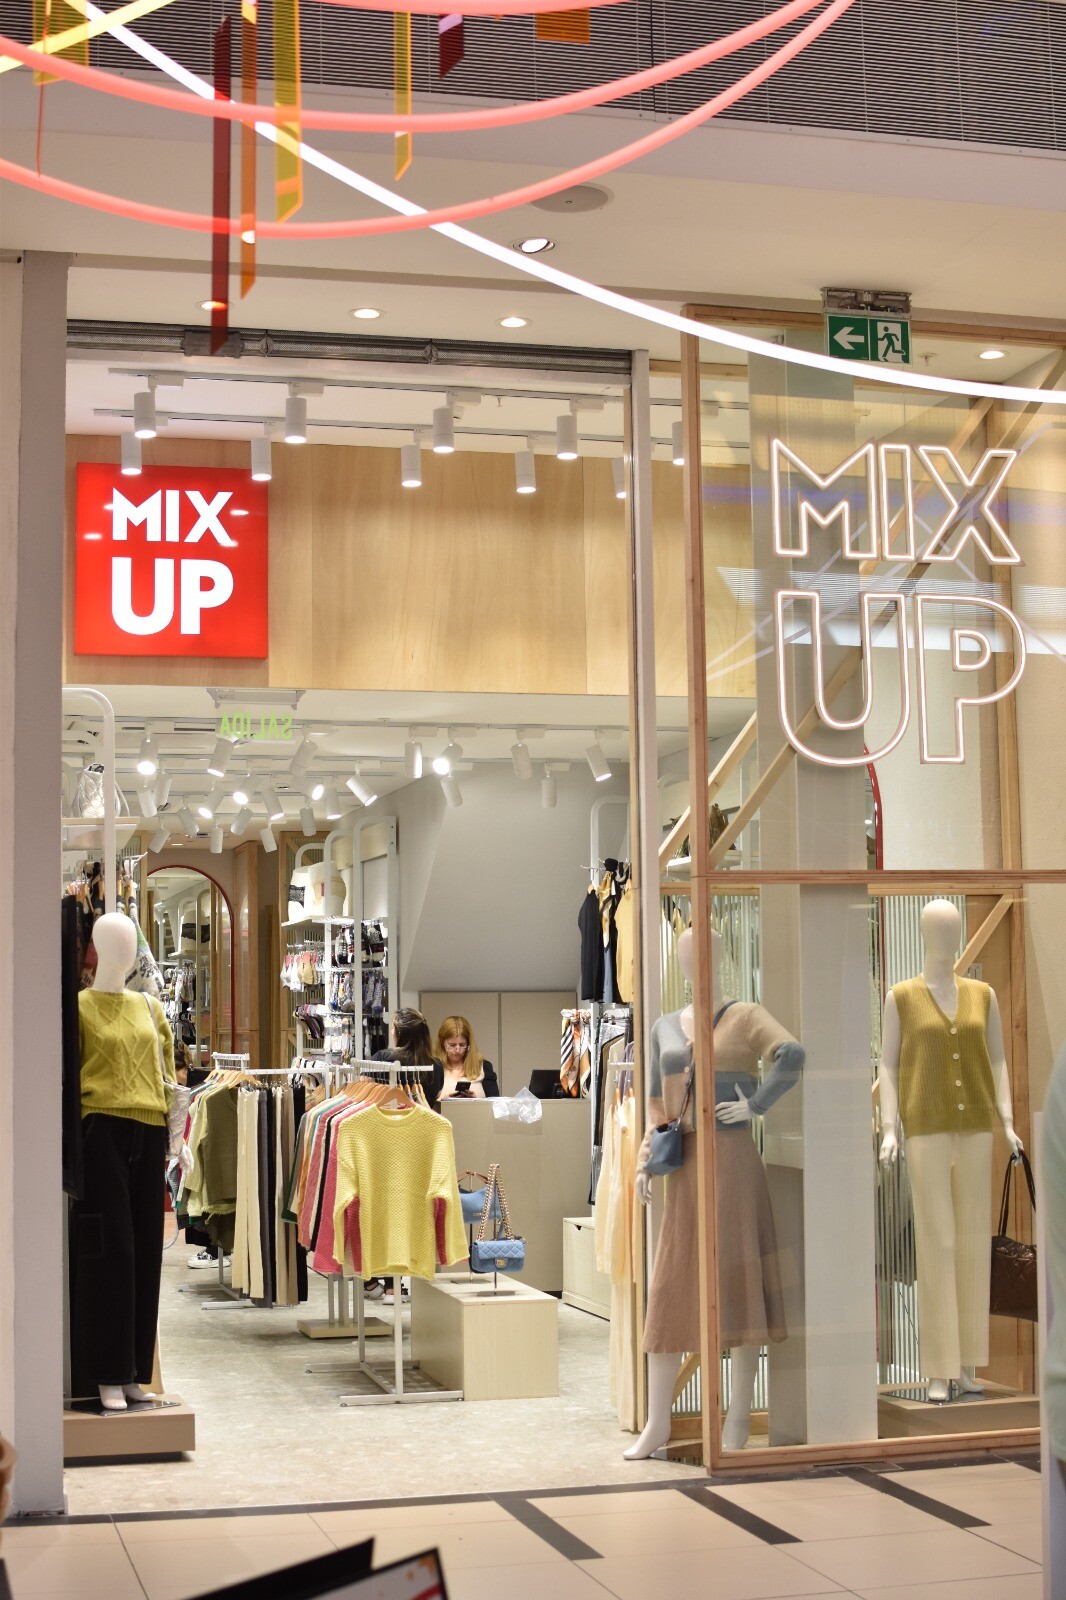 Mix Up - Tres Cruces Shopping